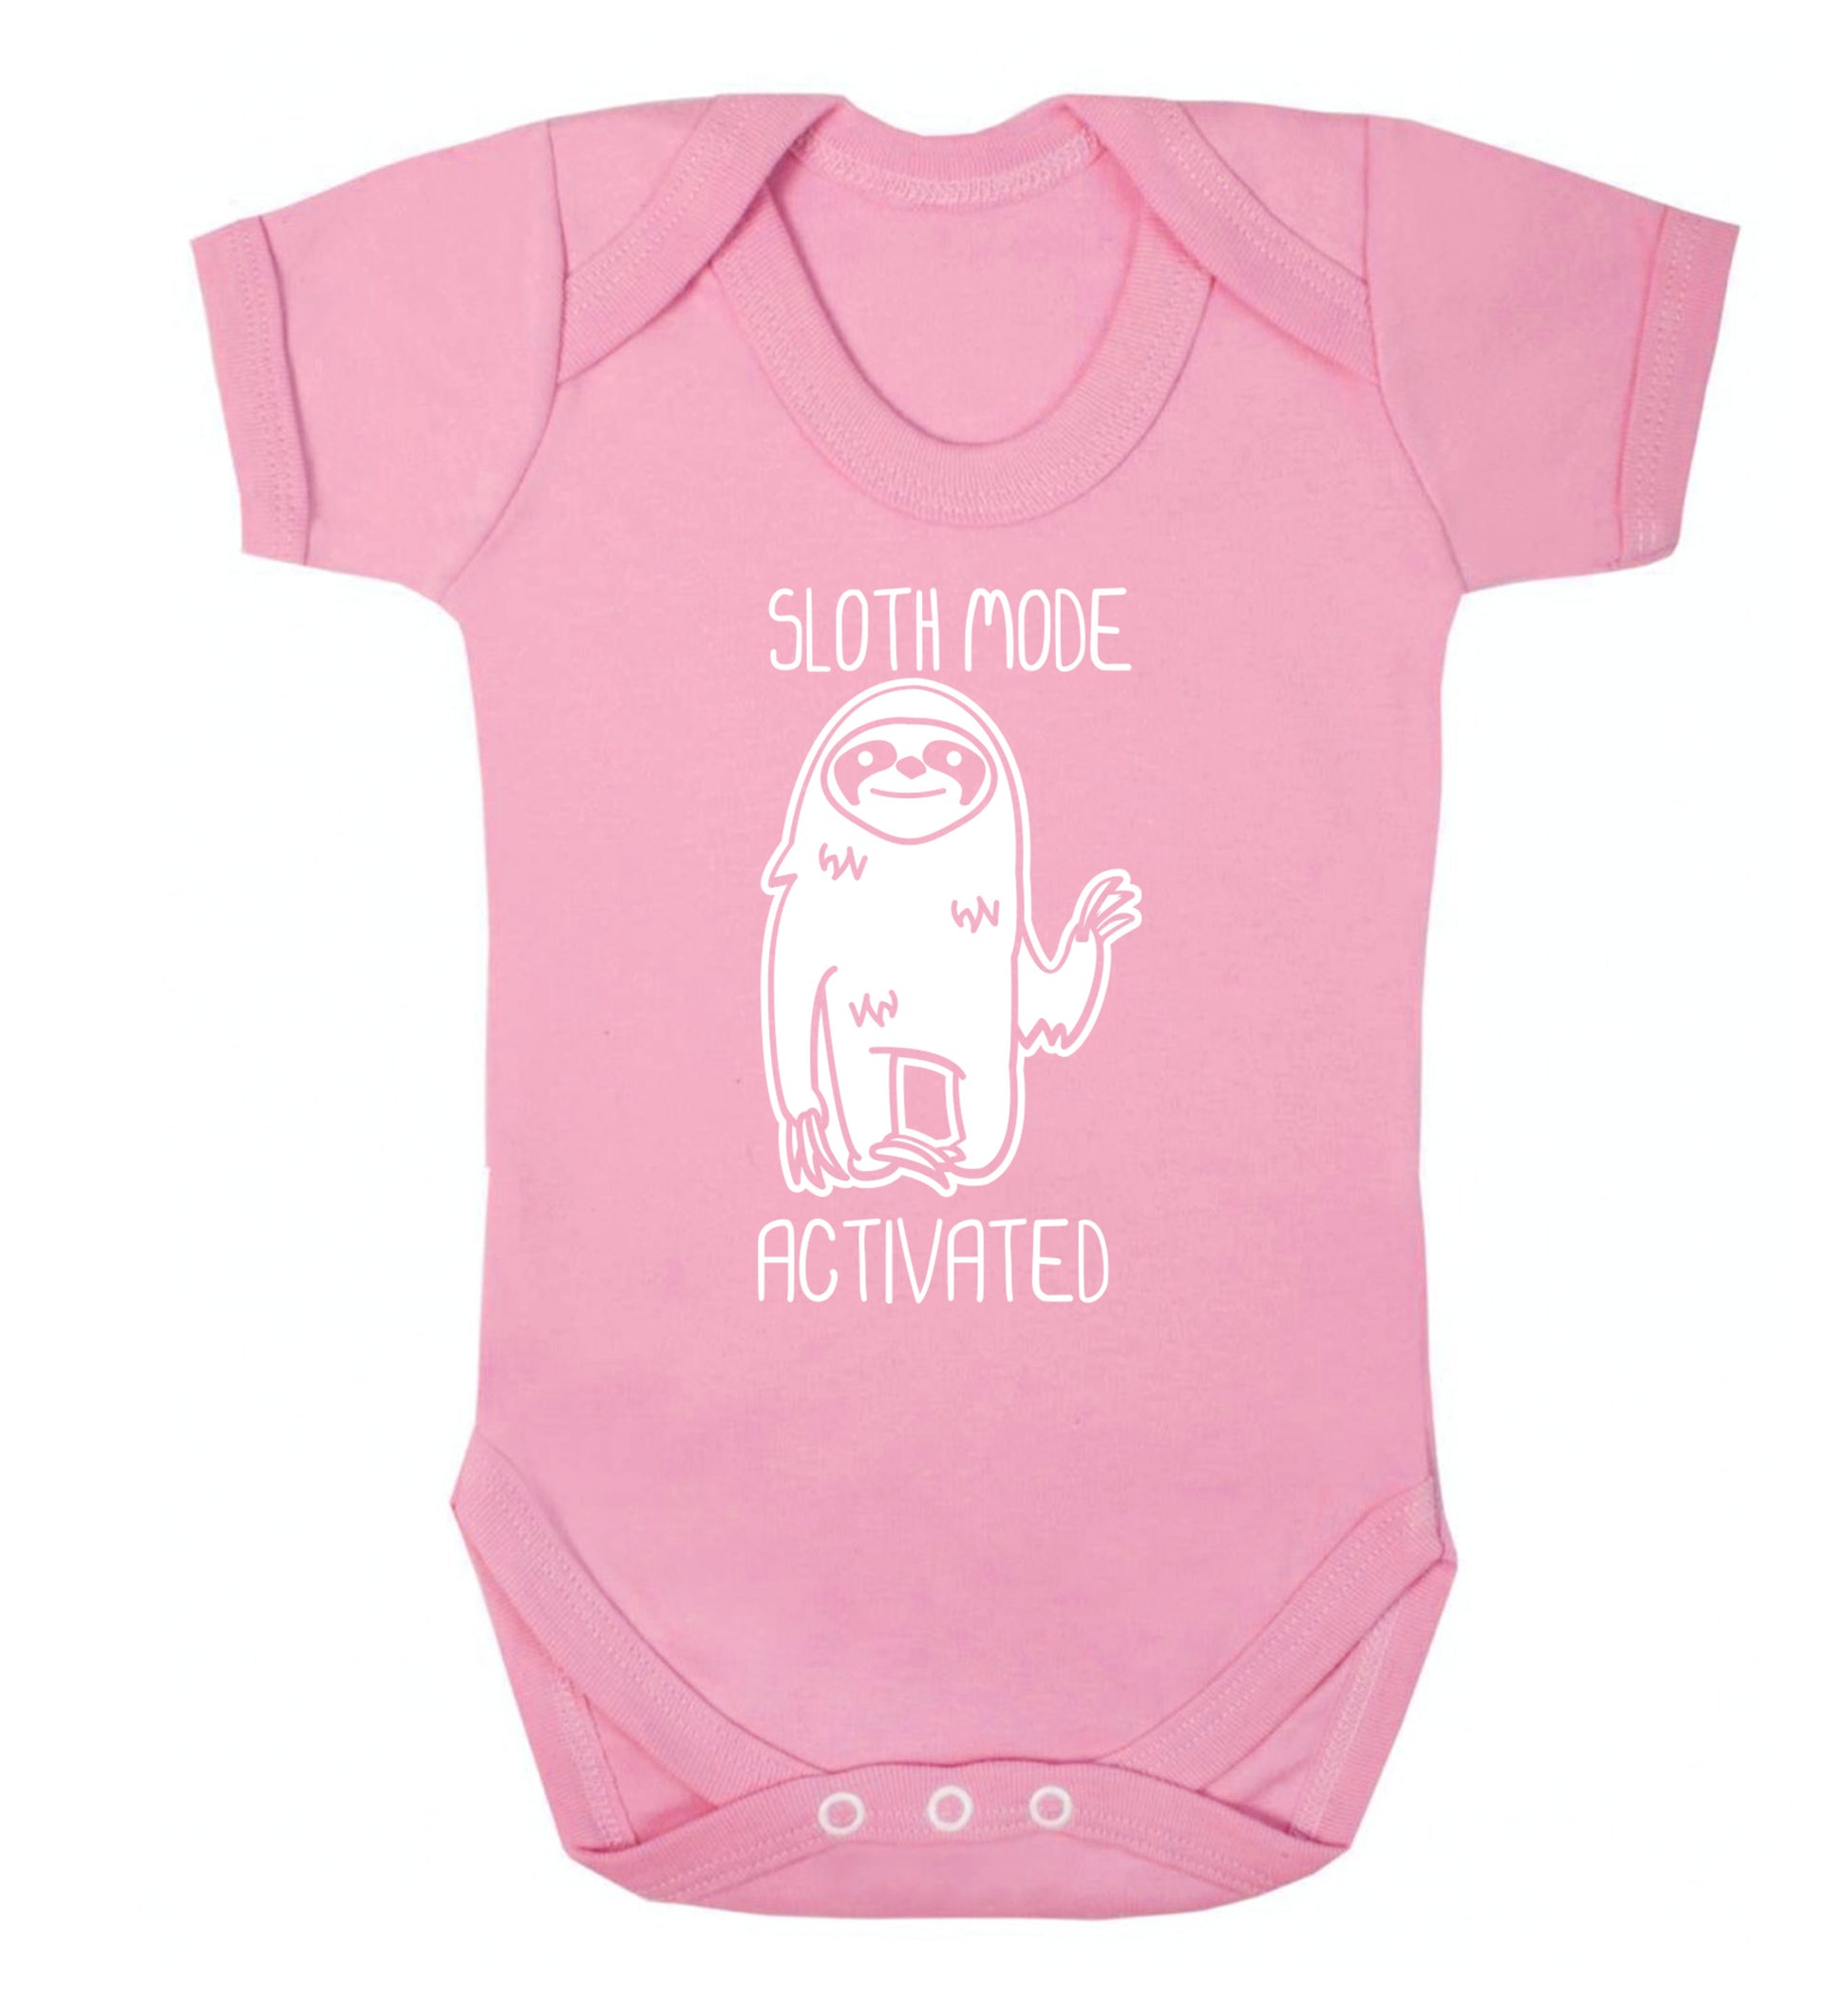 Sloth mode acitvated Baby Vest pale pink 18-24 months